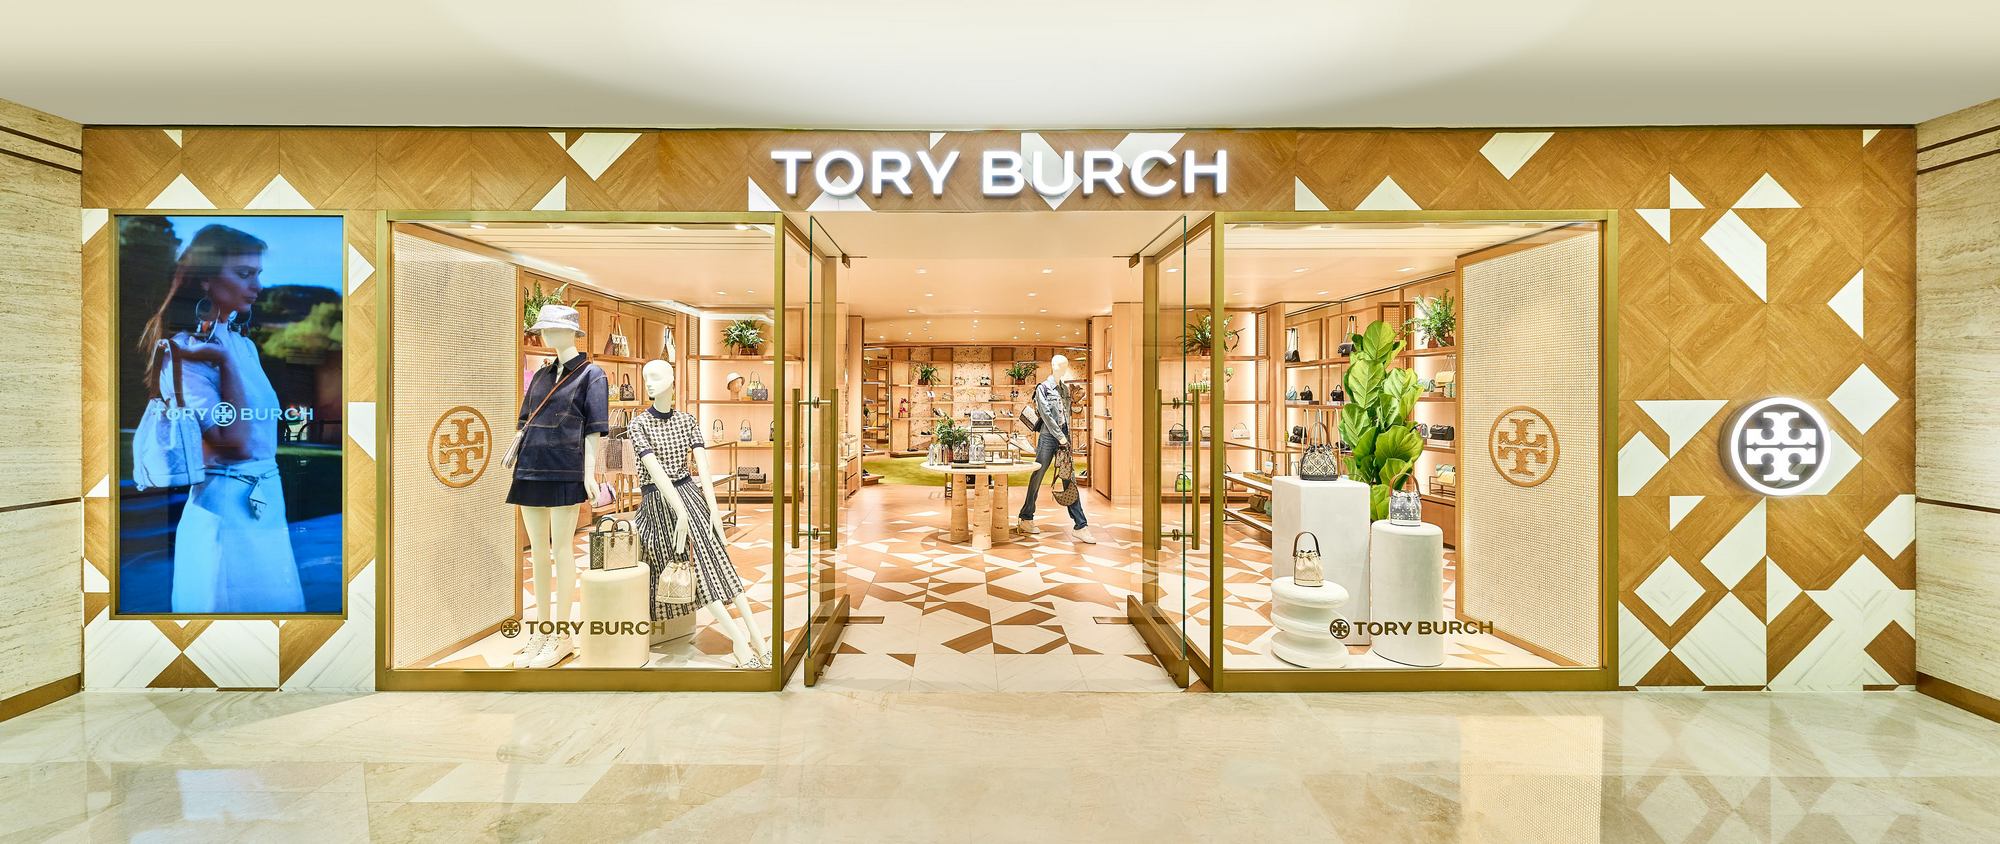 TAM SON WELCOMES TWO NEW BRANDS: TORY BURCH AND DIPTYQUE